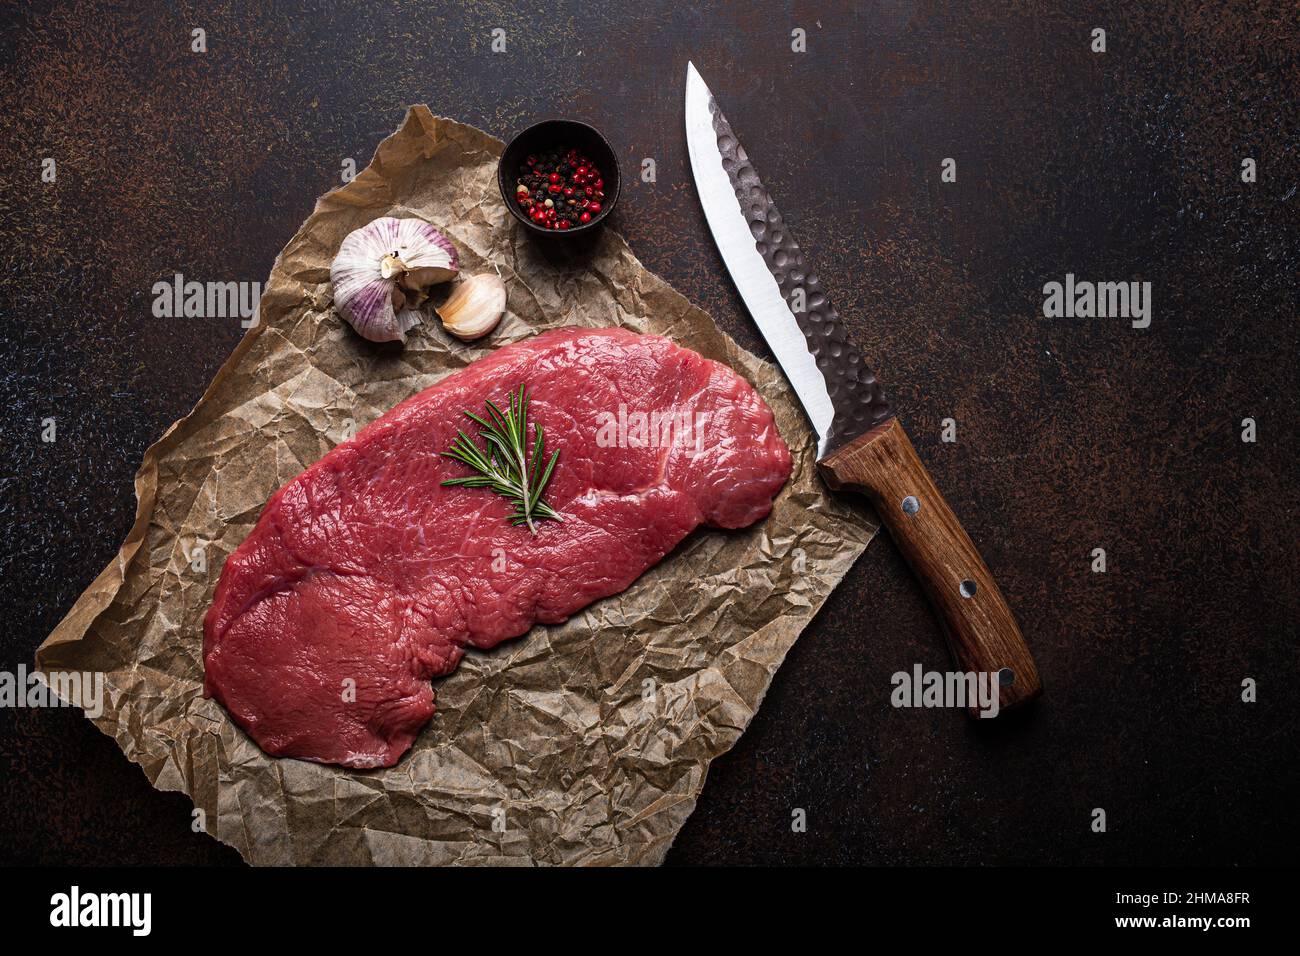 Beef lean raw fillet steak on baking paper with rosemary, garlic and spices Stock Photo